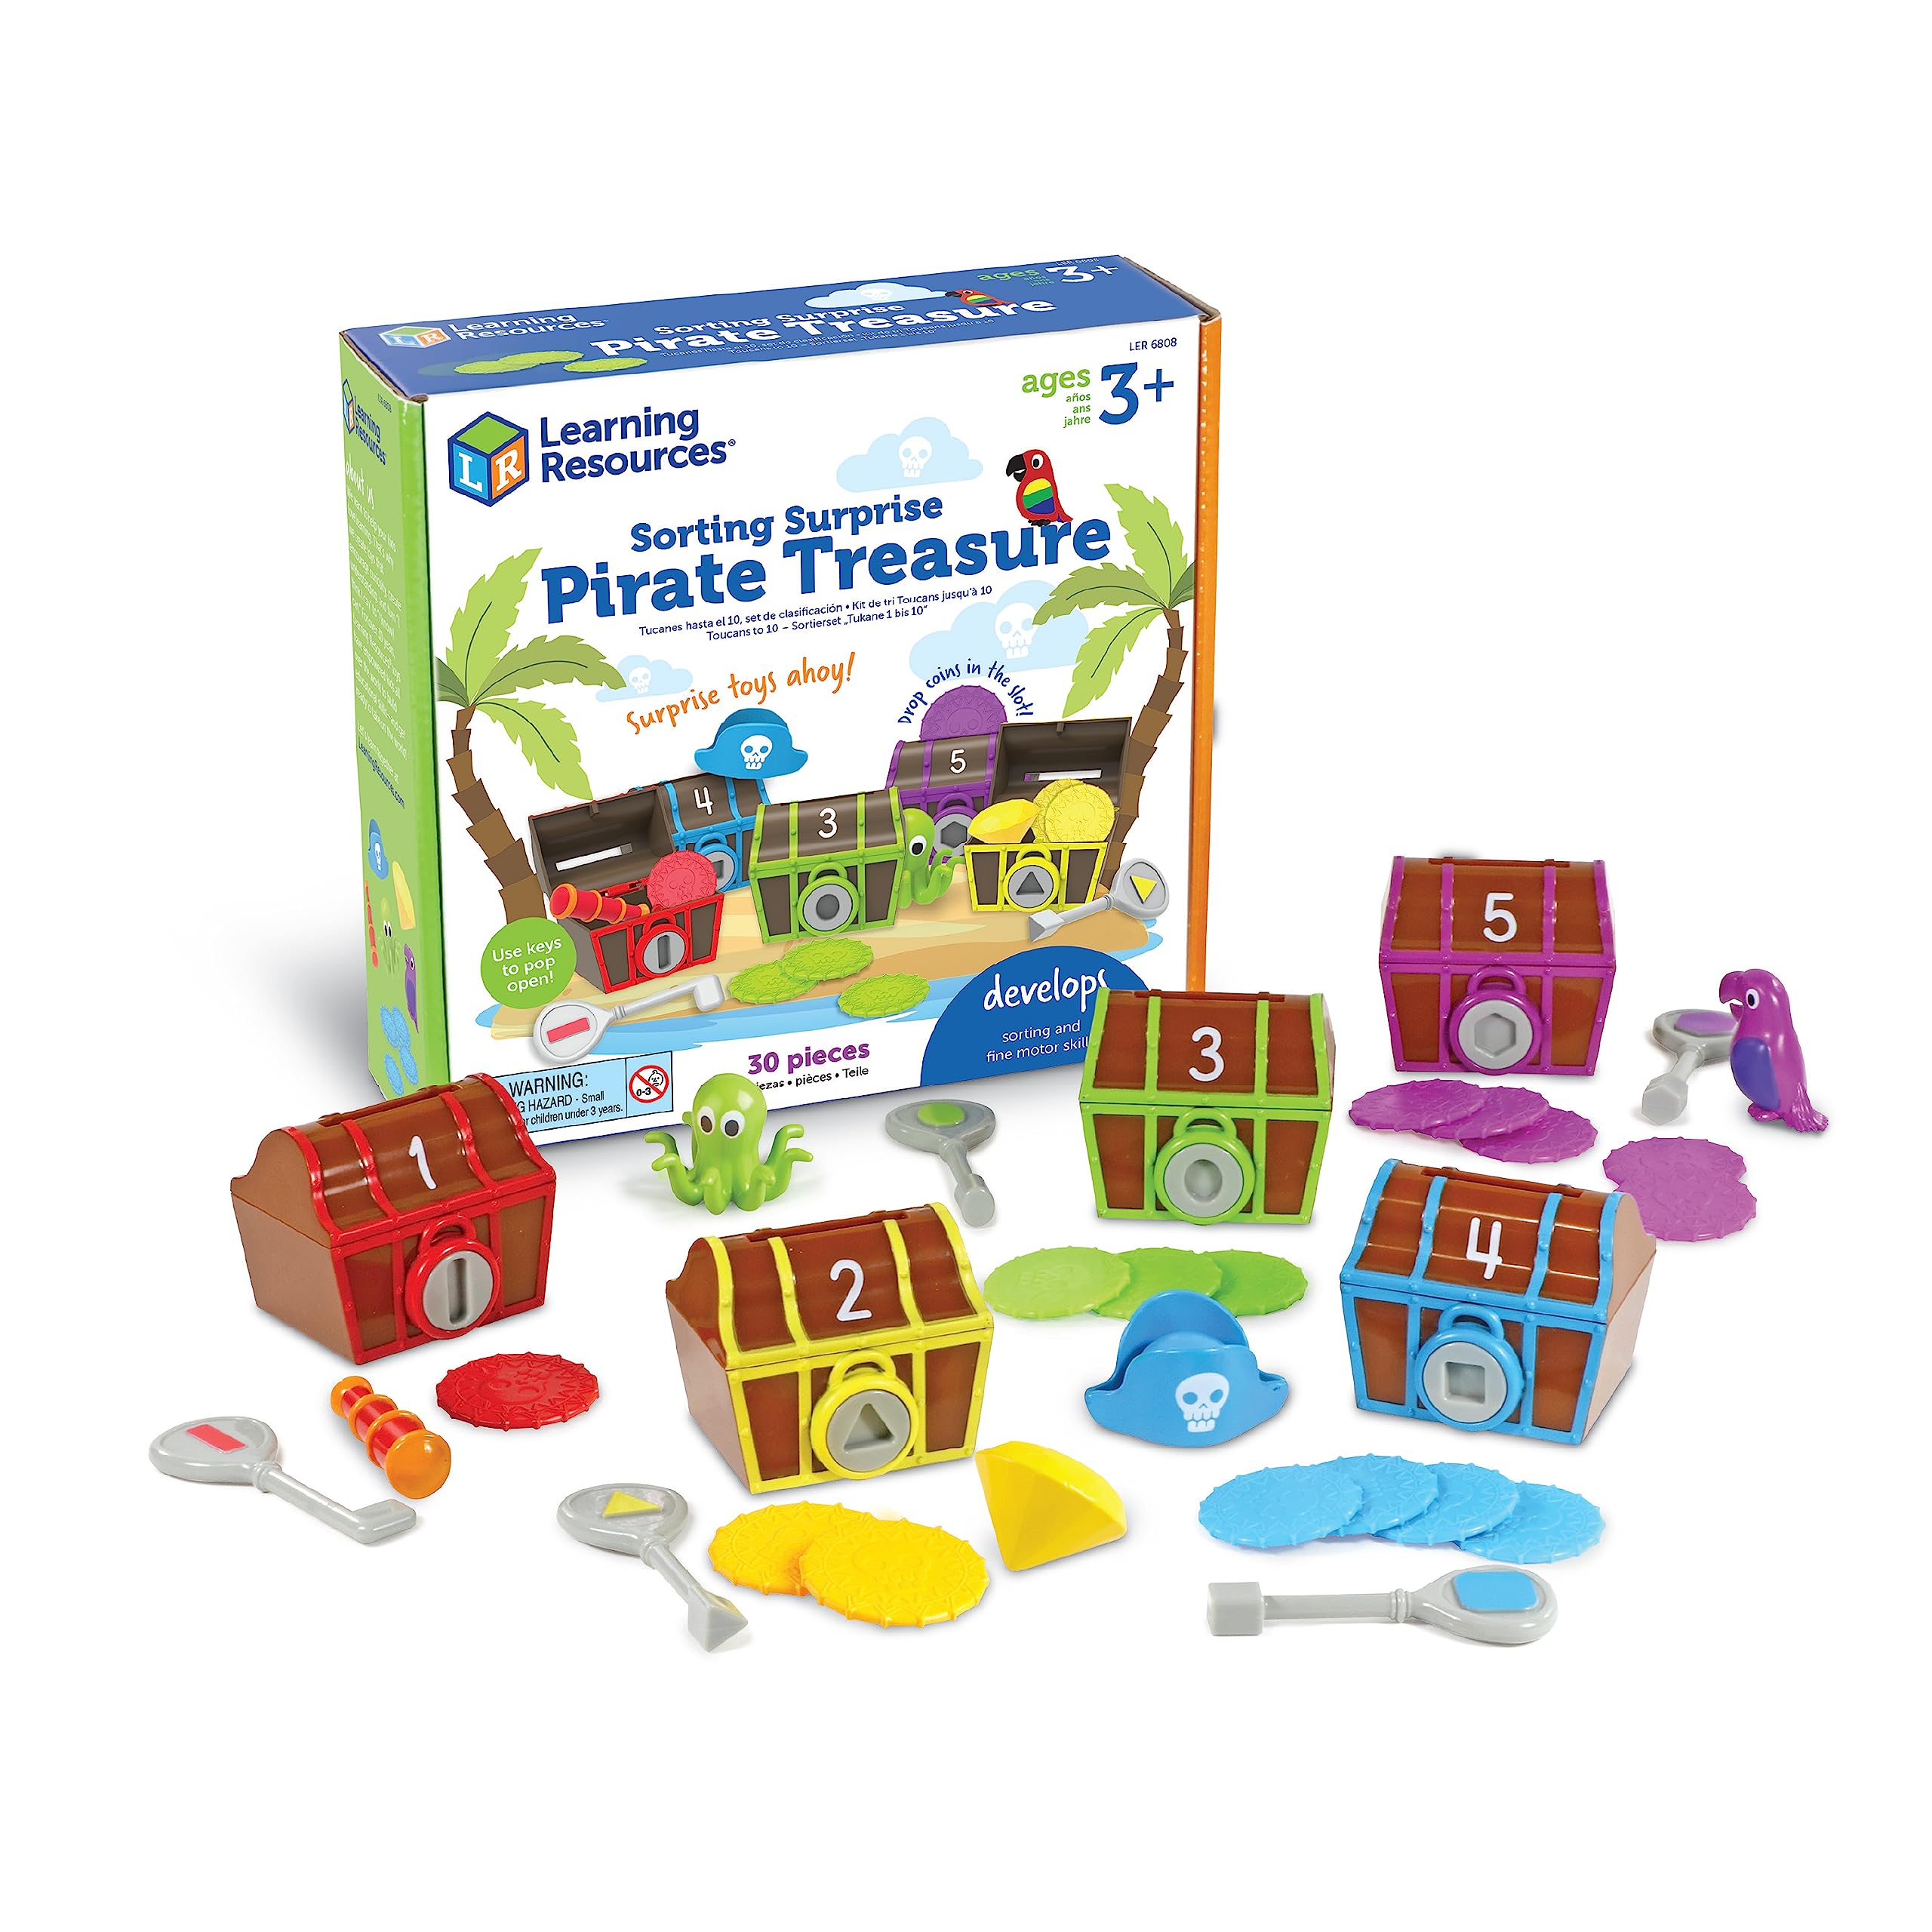 Learning Resources Sorting Surprise Pirate Treasure